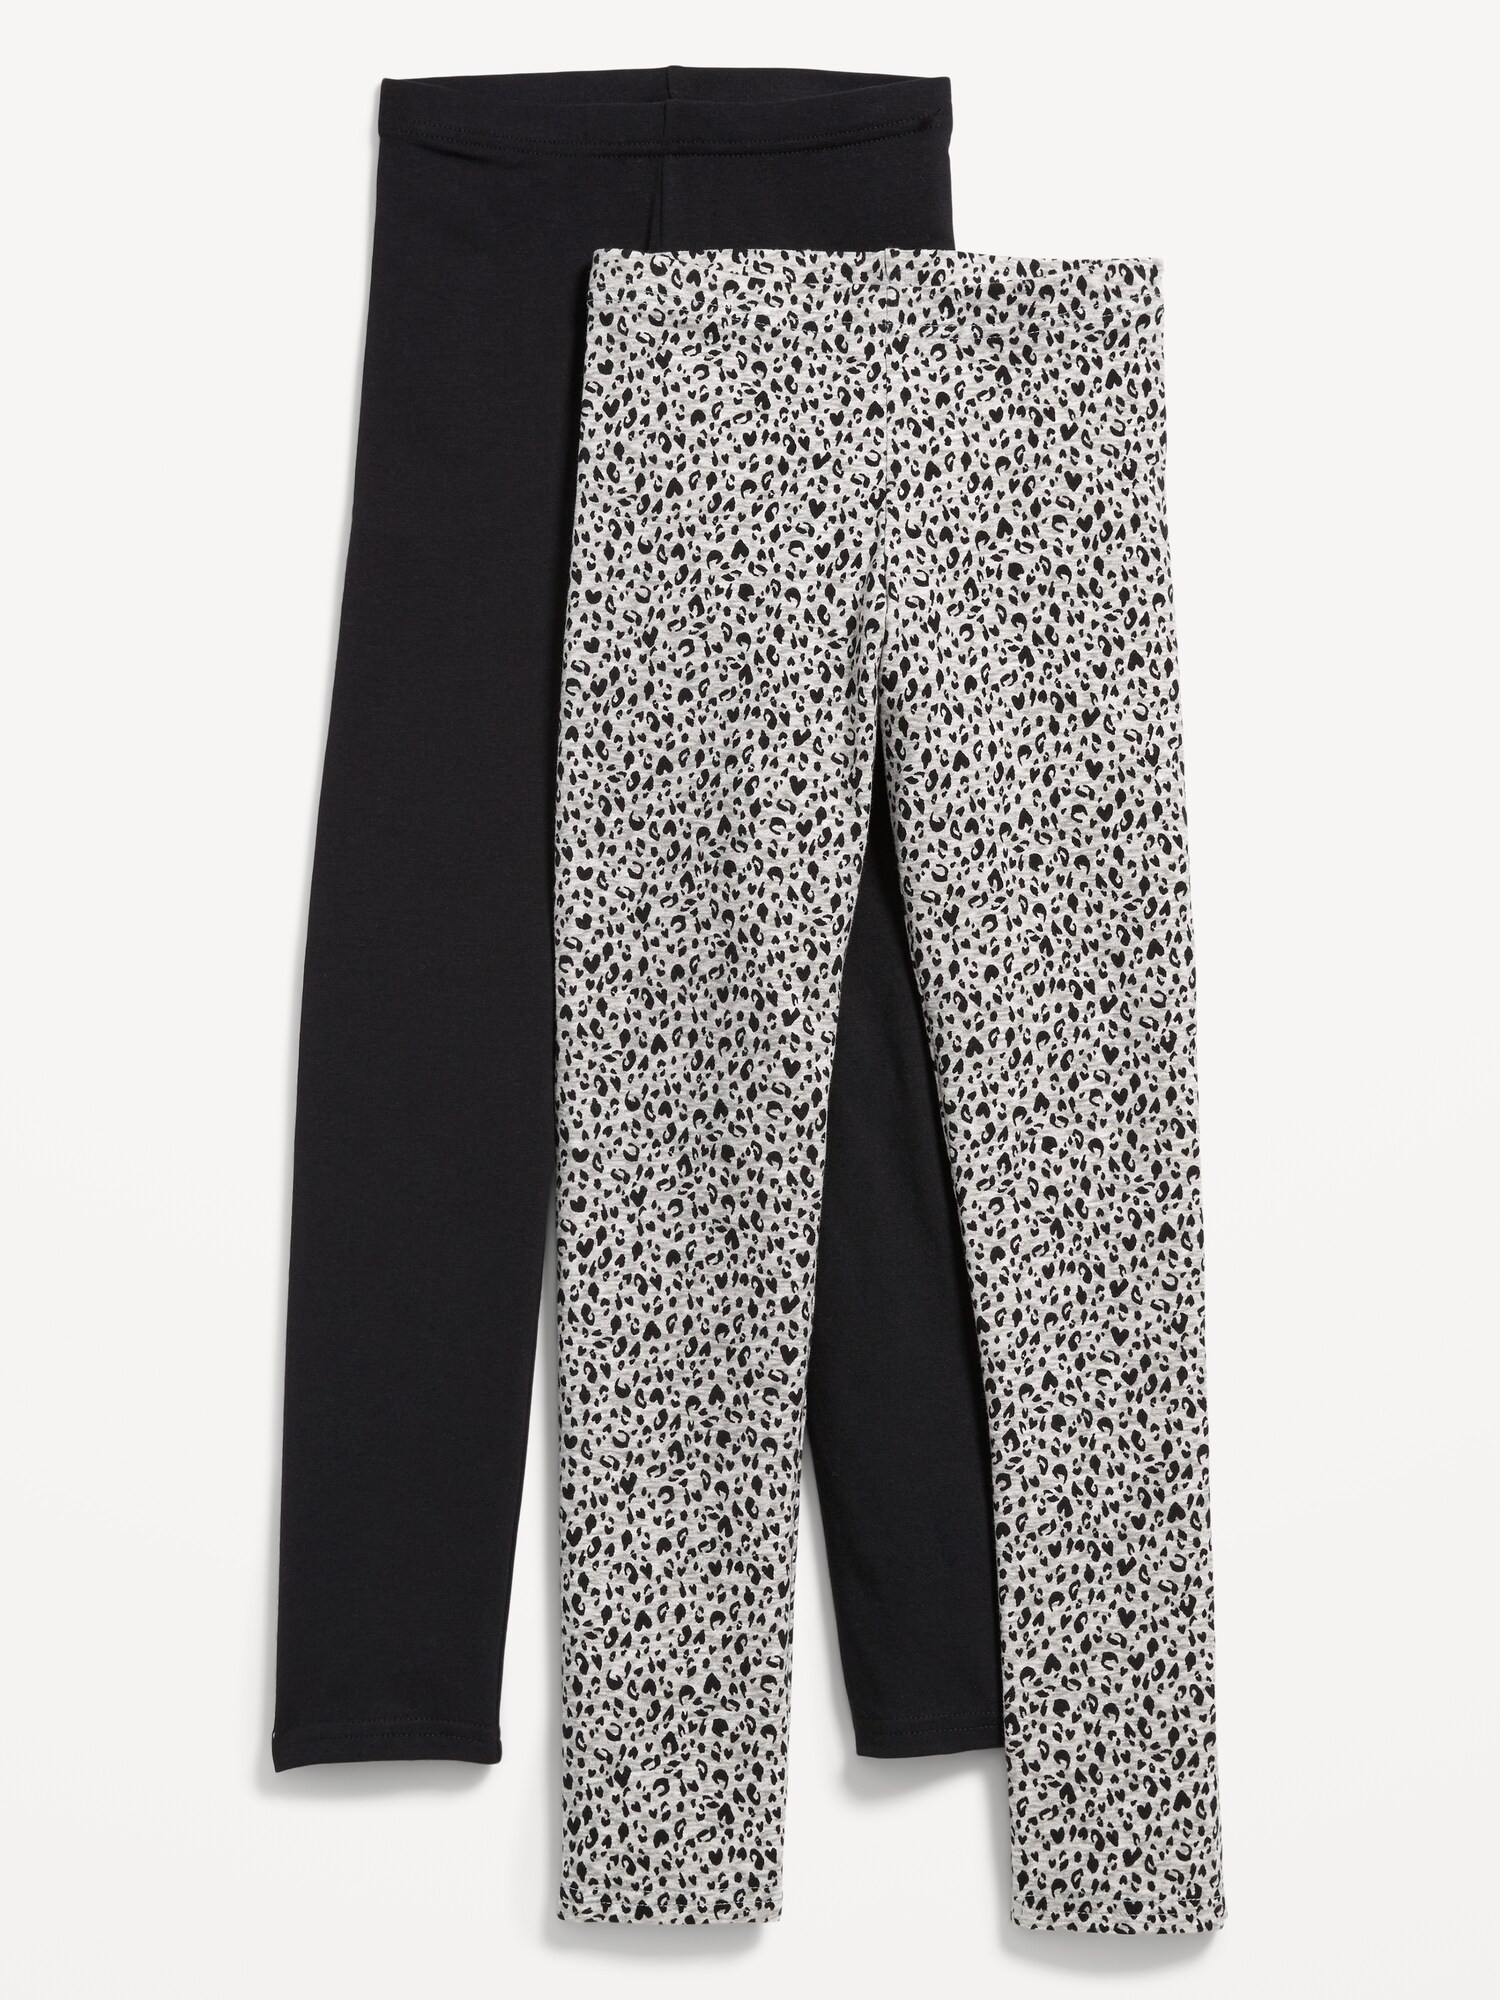 Old Navy Leopard Print Gray Leggings Size M (Tall) - 33% off